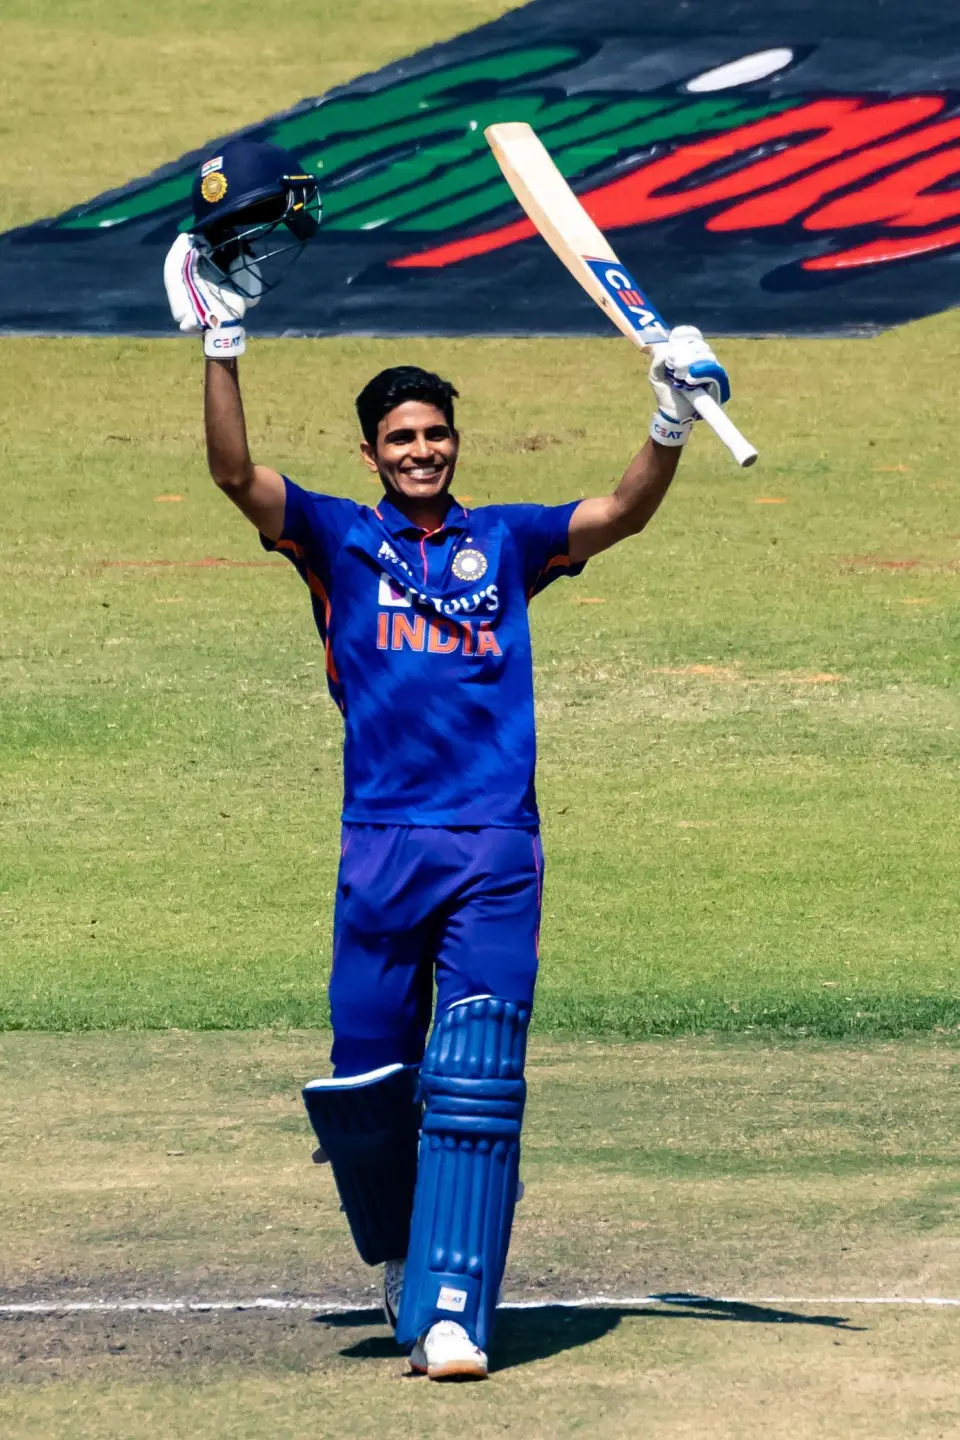 IND vs ZIM: I Got Schooled From Dad After Getting Out In 2nd ODI, I Dedicate This Innings To My Dad - Shubman Gill